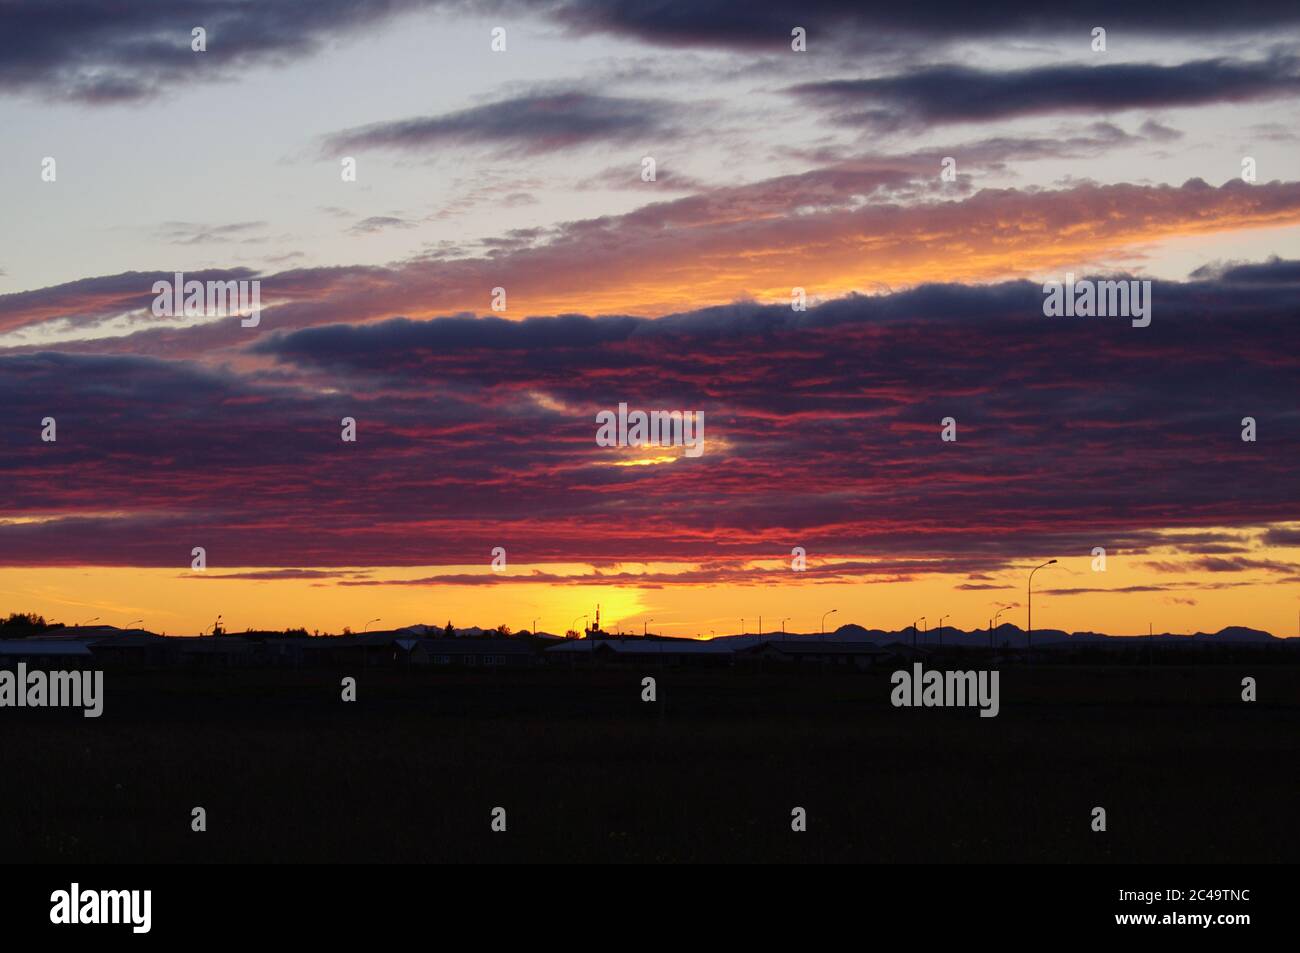 Magenta clouds at sunset over Silhouette horizon,Sequence of images of a sunset,Blue skies with magenta clouds at sunset,setting sun magenta clouds, Stock Photo